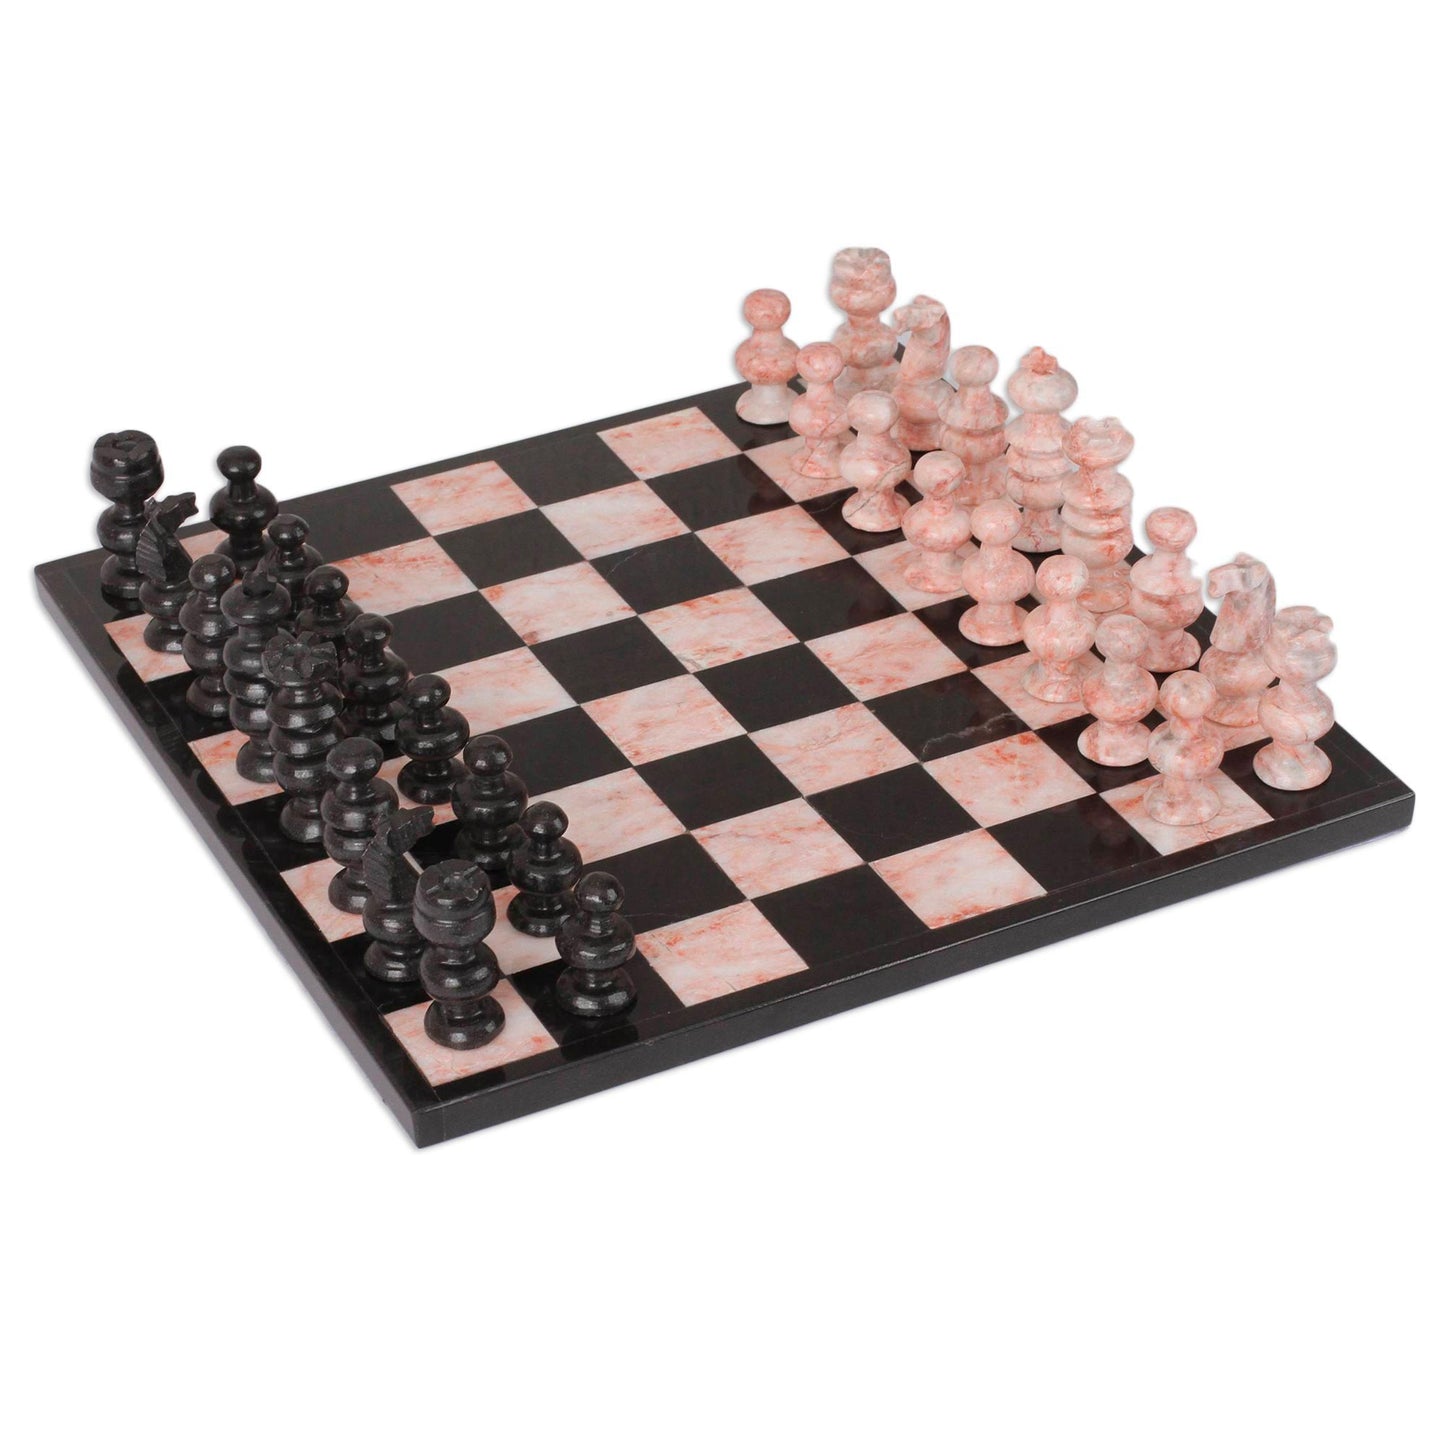 Glorious Battle Handcrafted Marble Chess Set (Large)